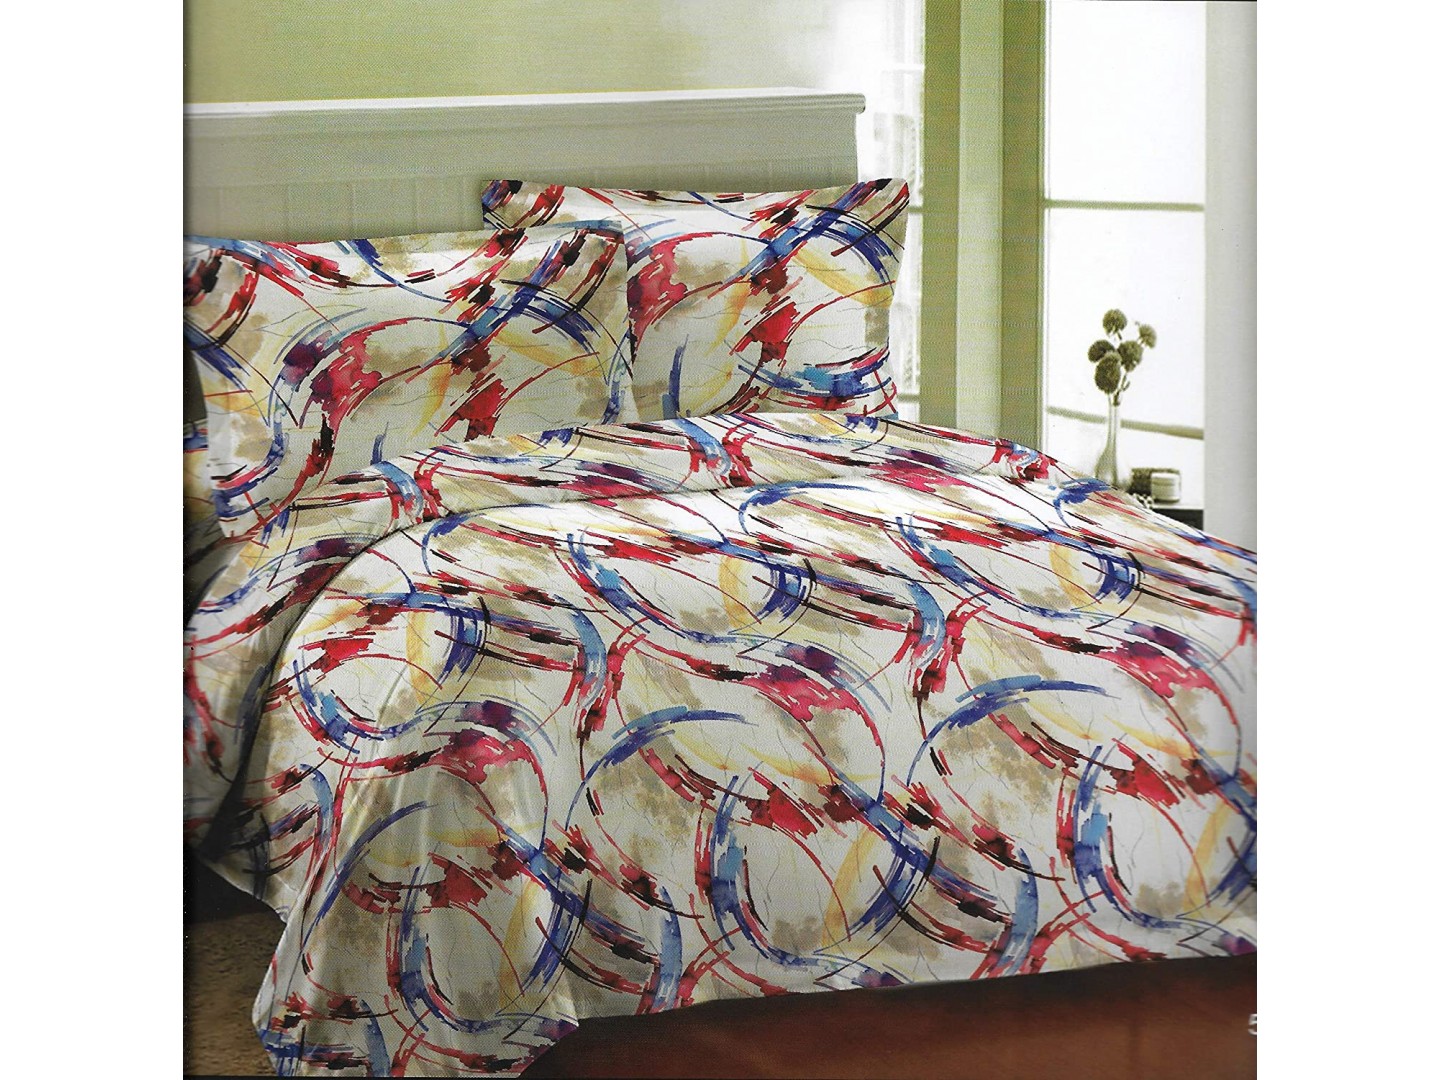 Bombay Dyeing bedspread